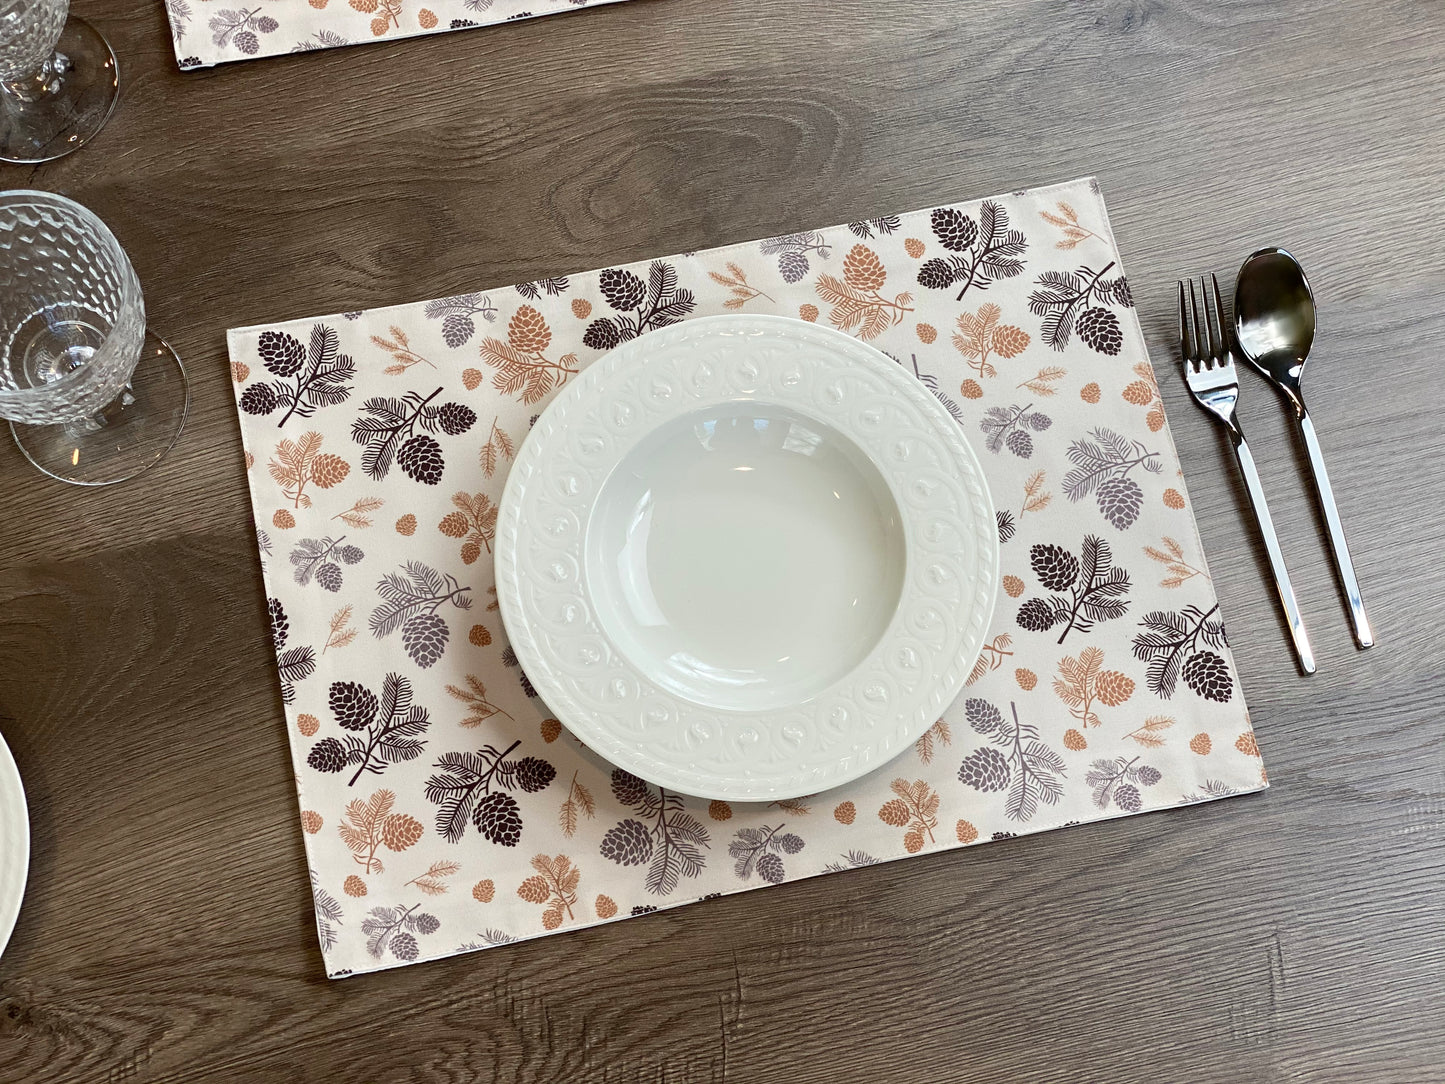 Set of 4 Autumn pine cone placemat, fir branches and pinecones, Washable Cotton Placemat for fall dining table